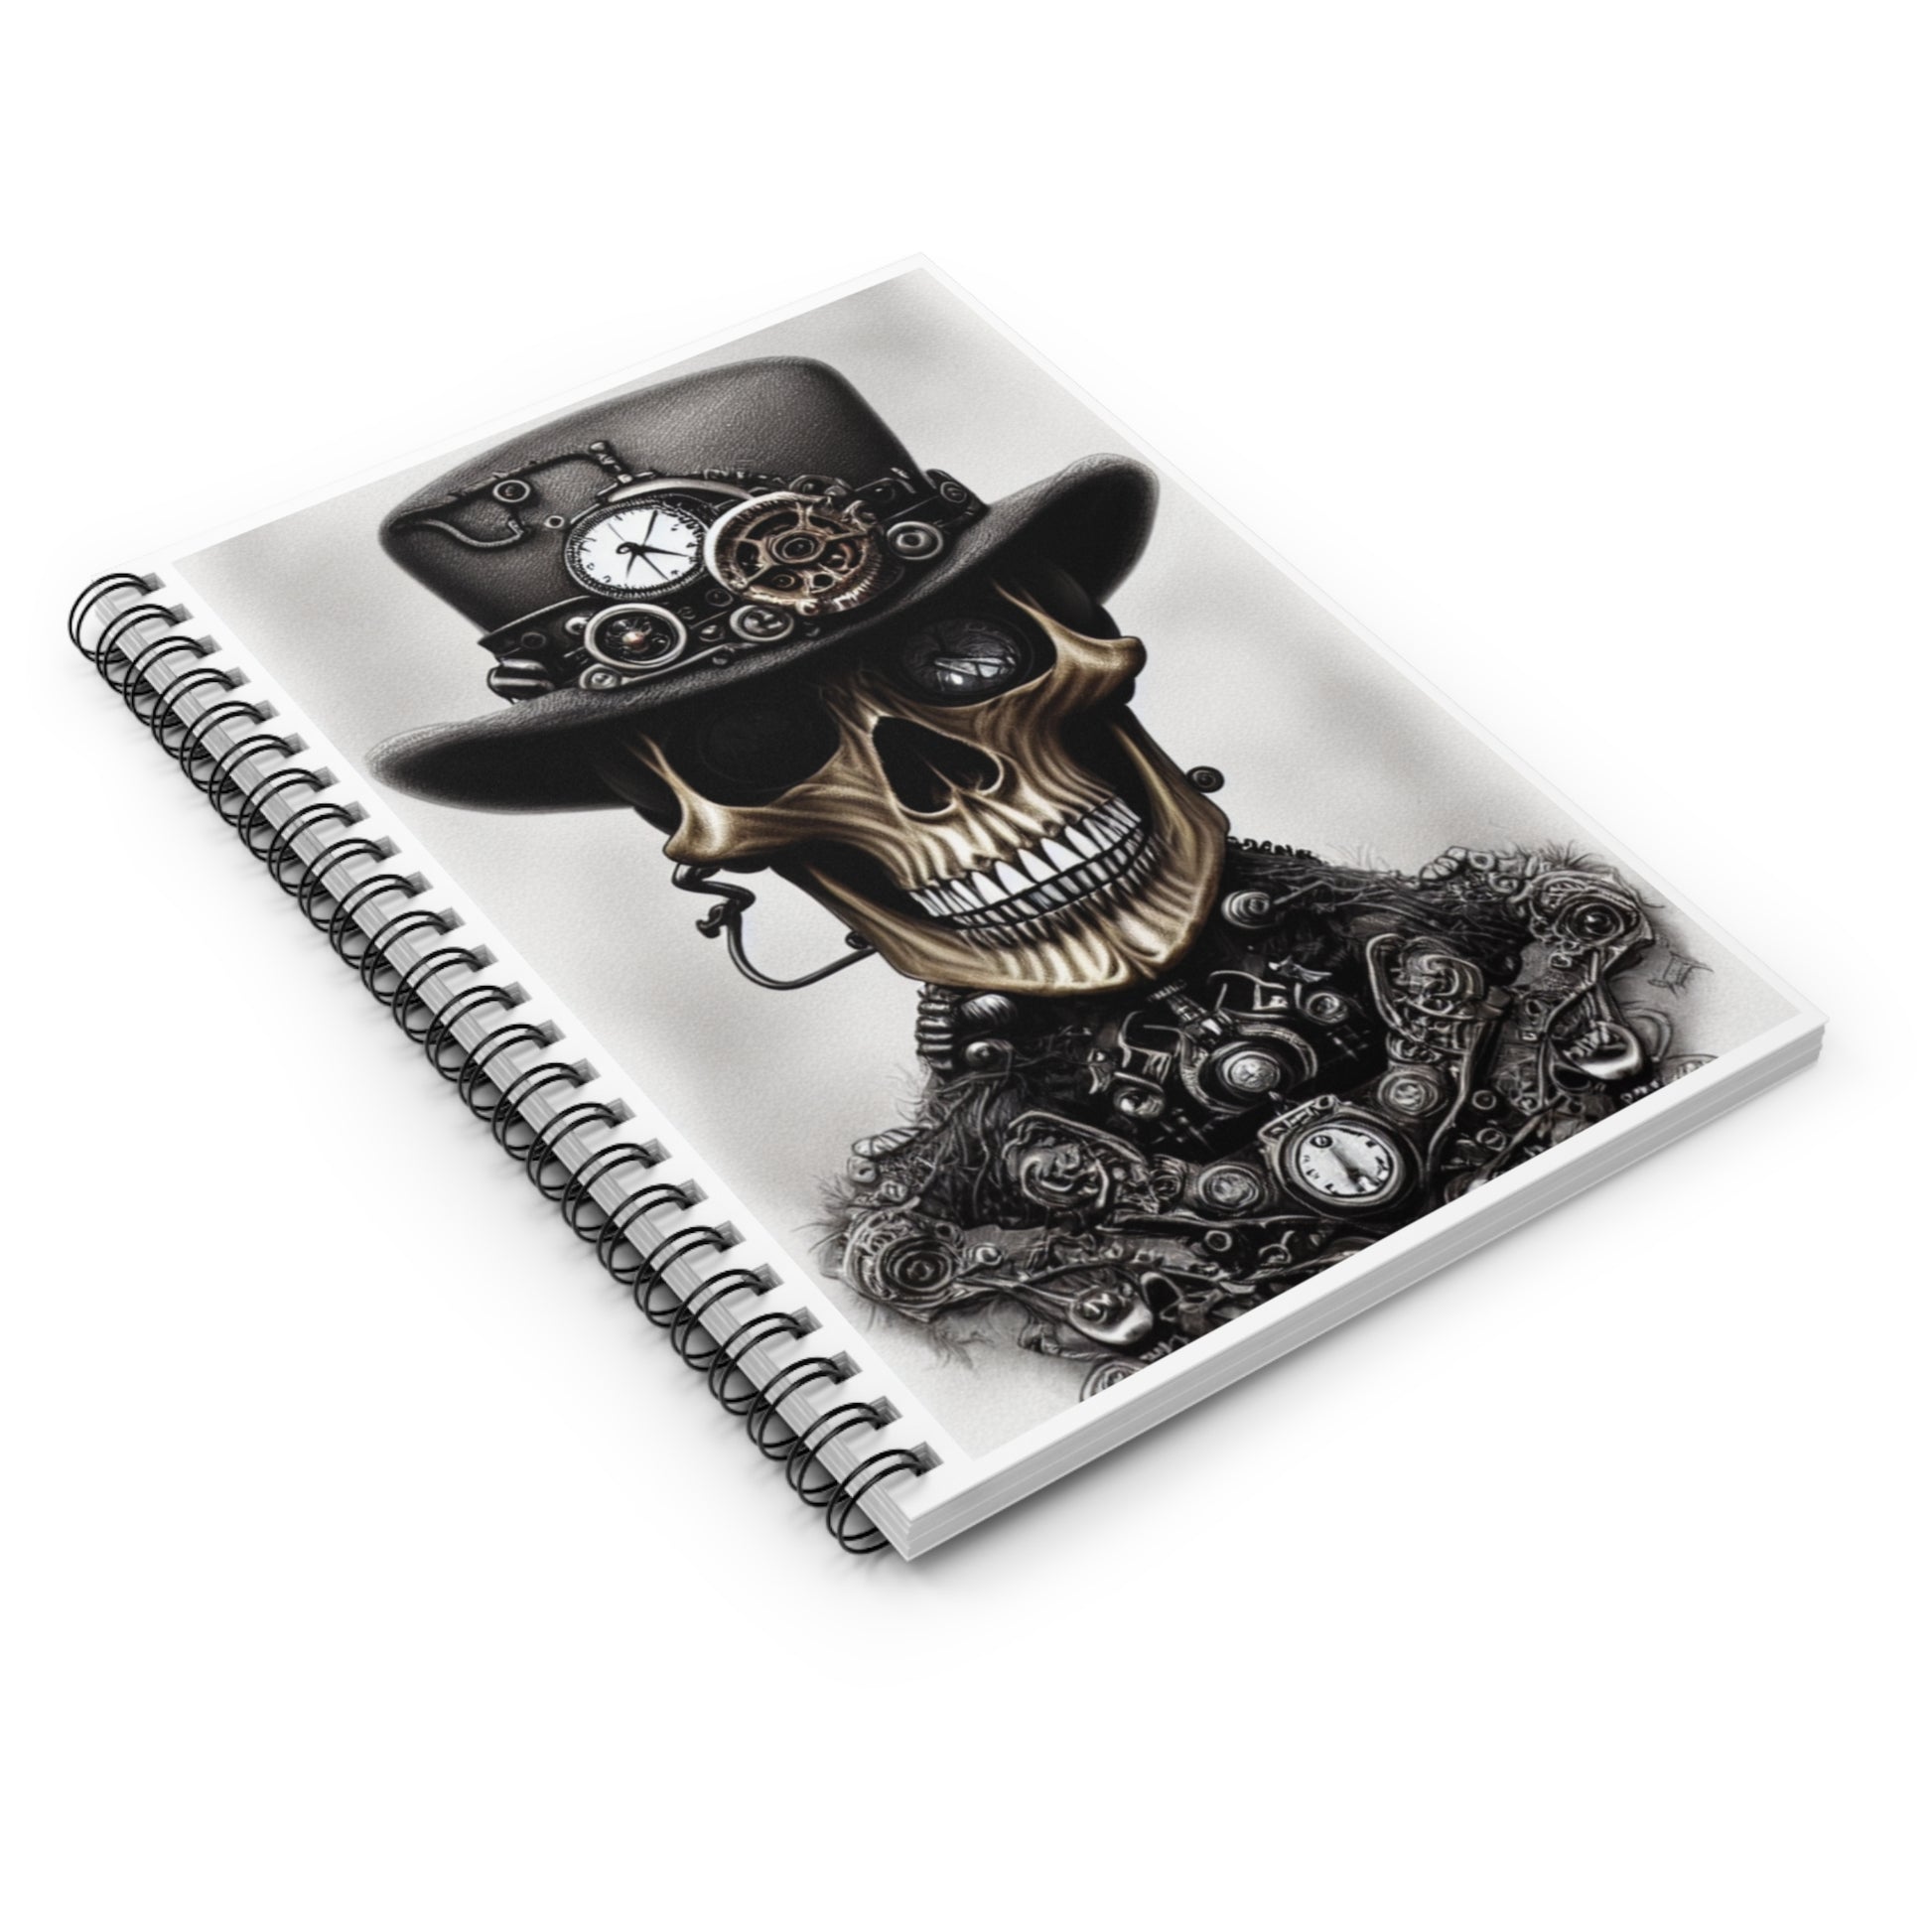 Steampunk Skeleton: Spiral Notebook - Log Books - Journals - Diaries - and More Custom Printed by TheGlassyLass.com